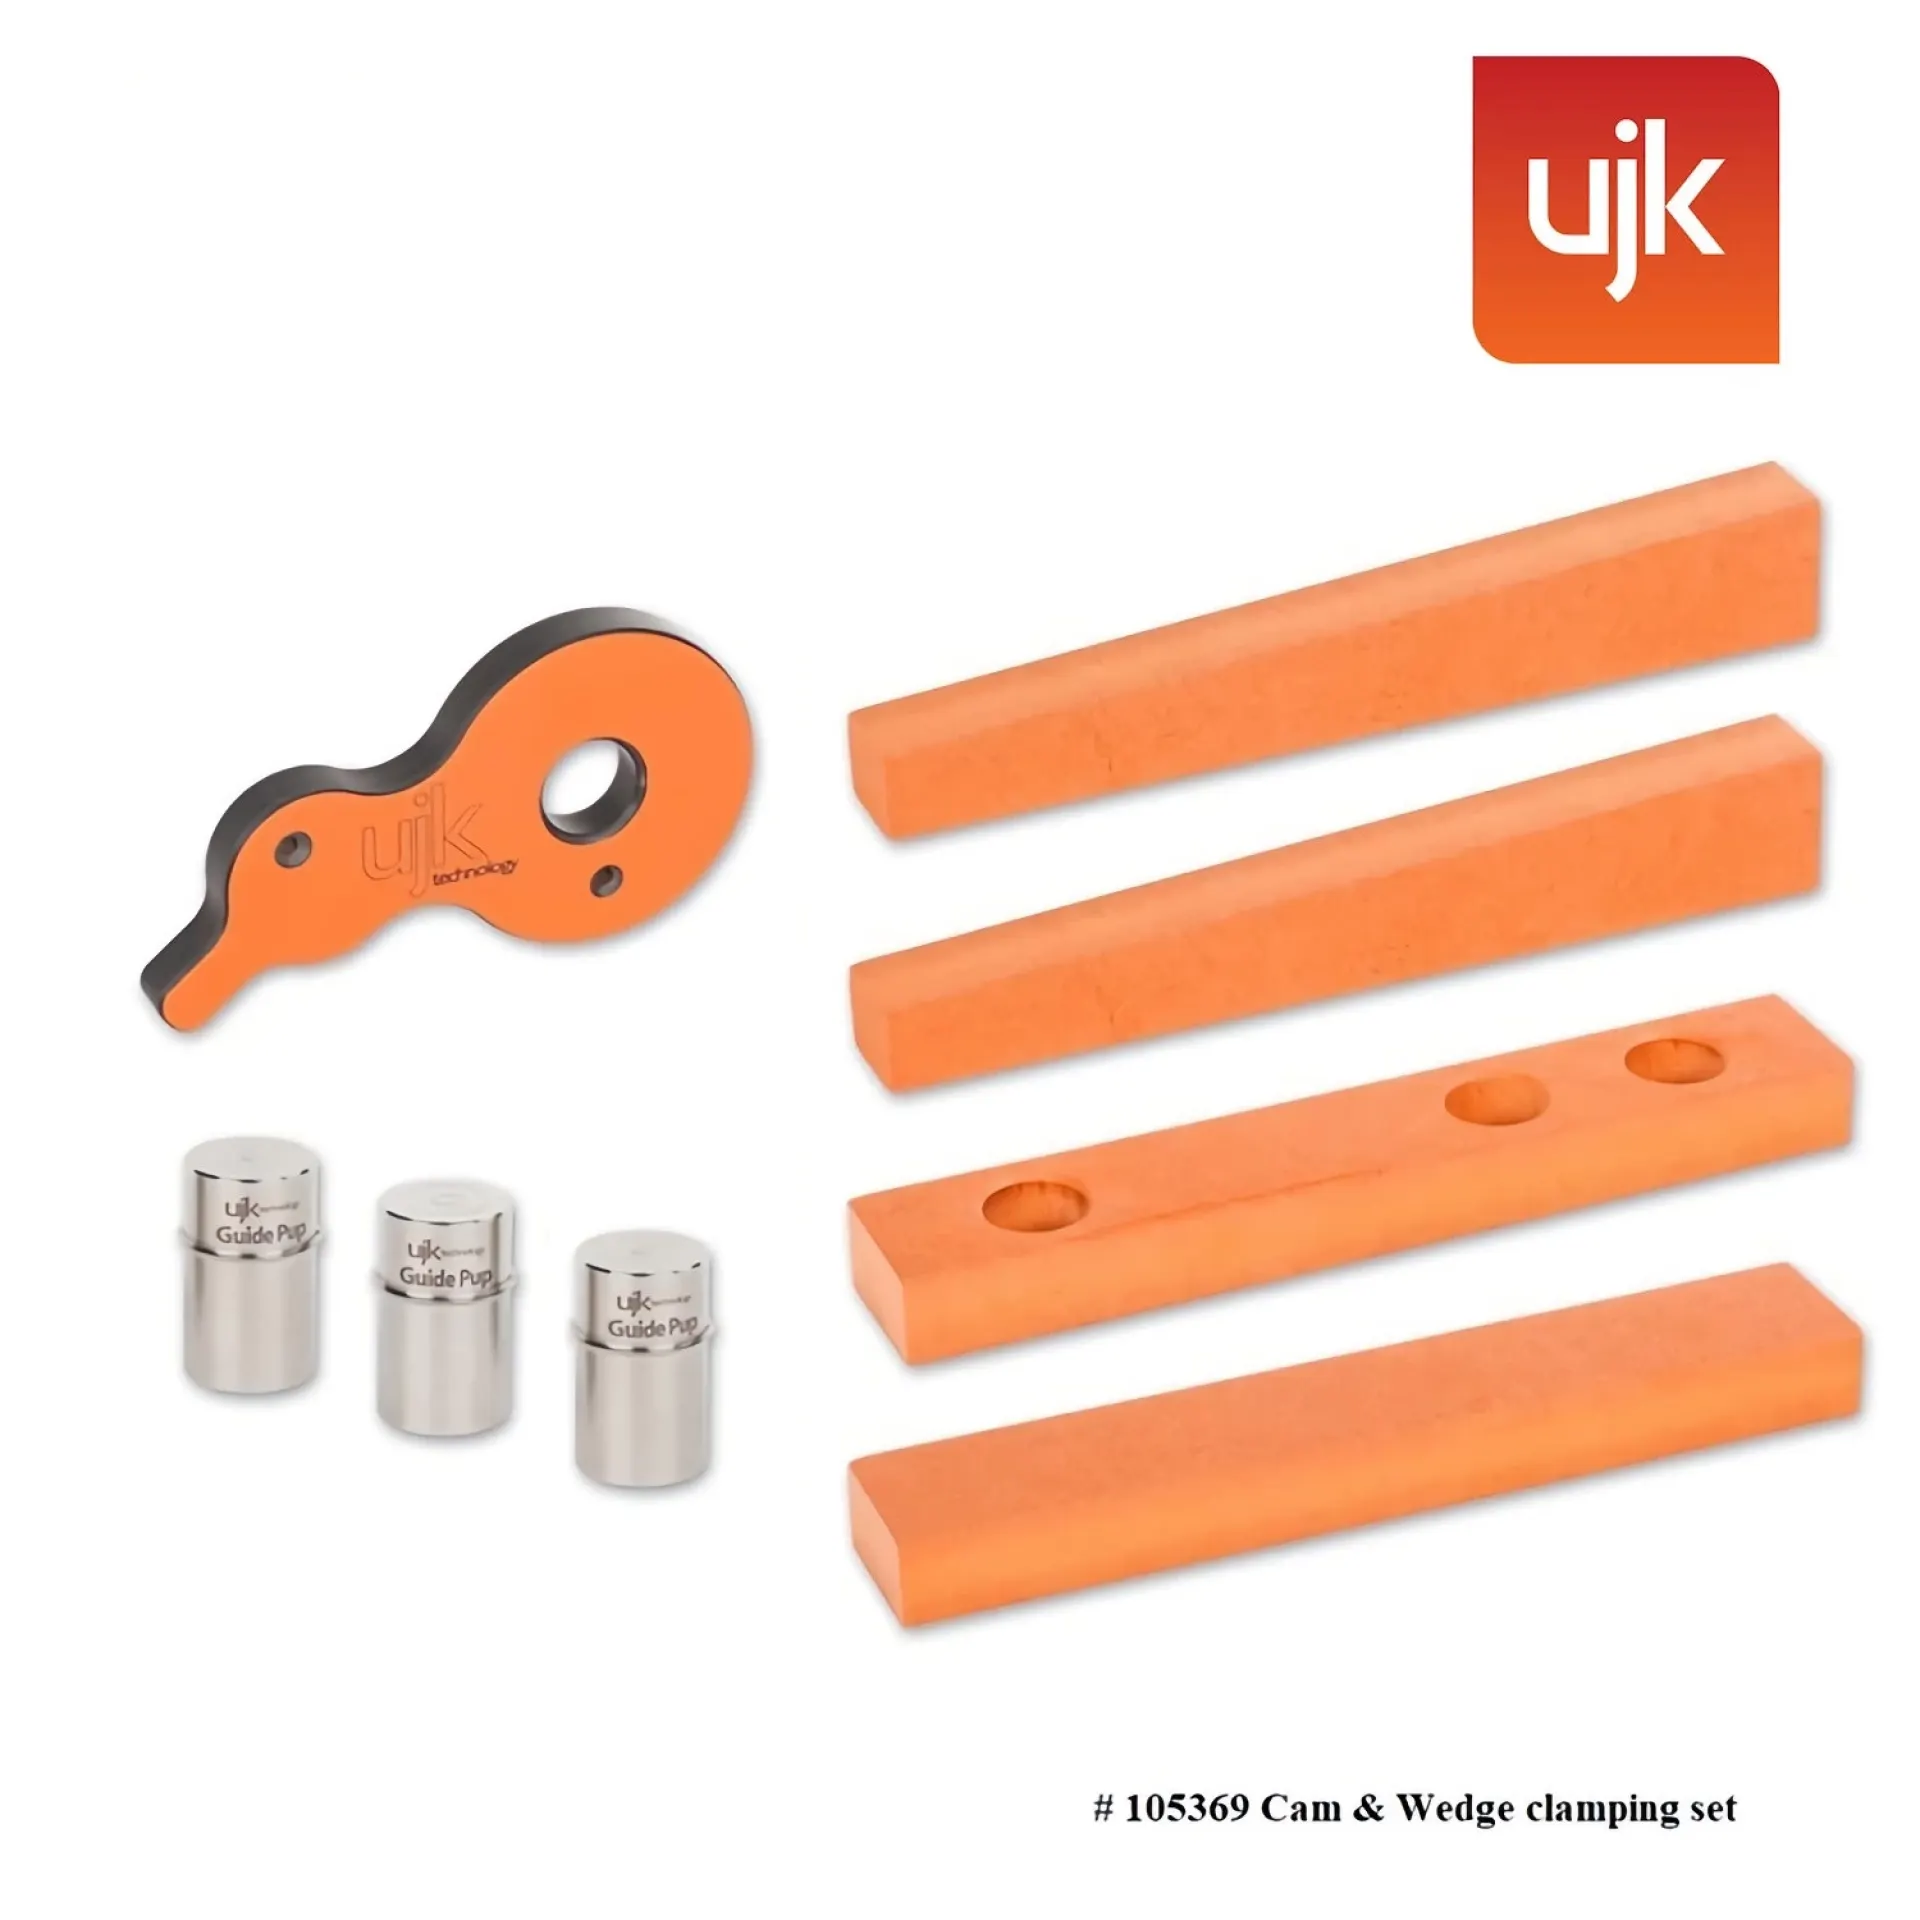 UJK_cam_and_wedge_clamping_set.